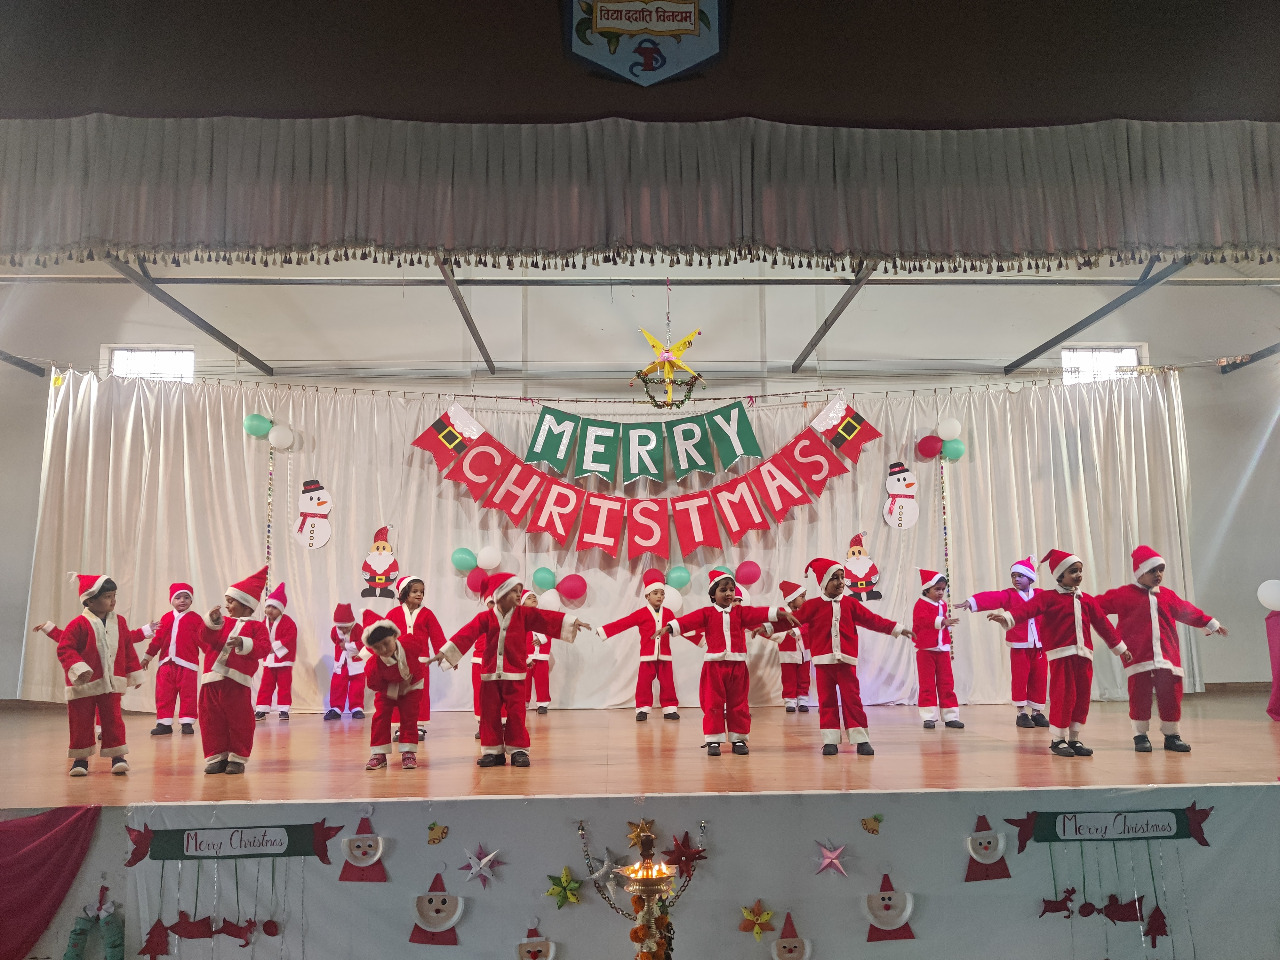 Christmas is celebrated at St. Teresa's School